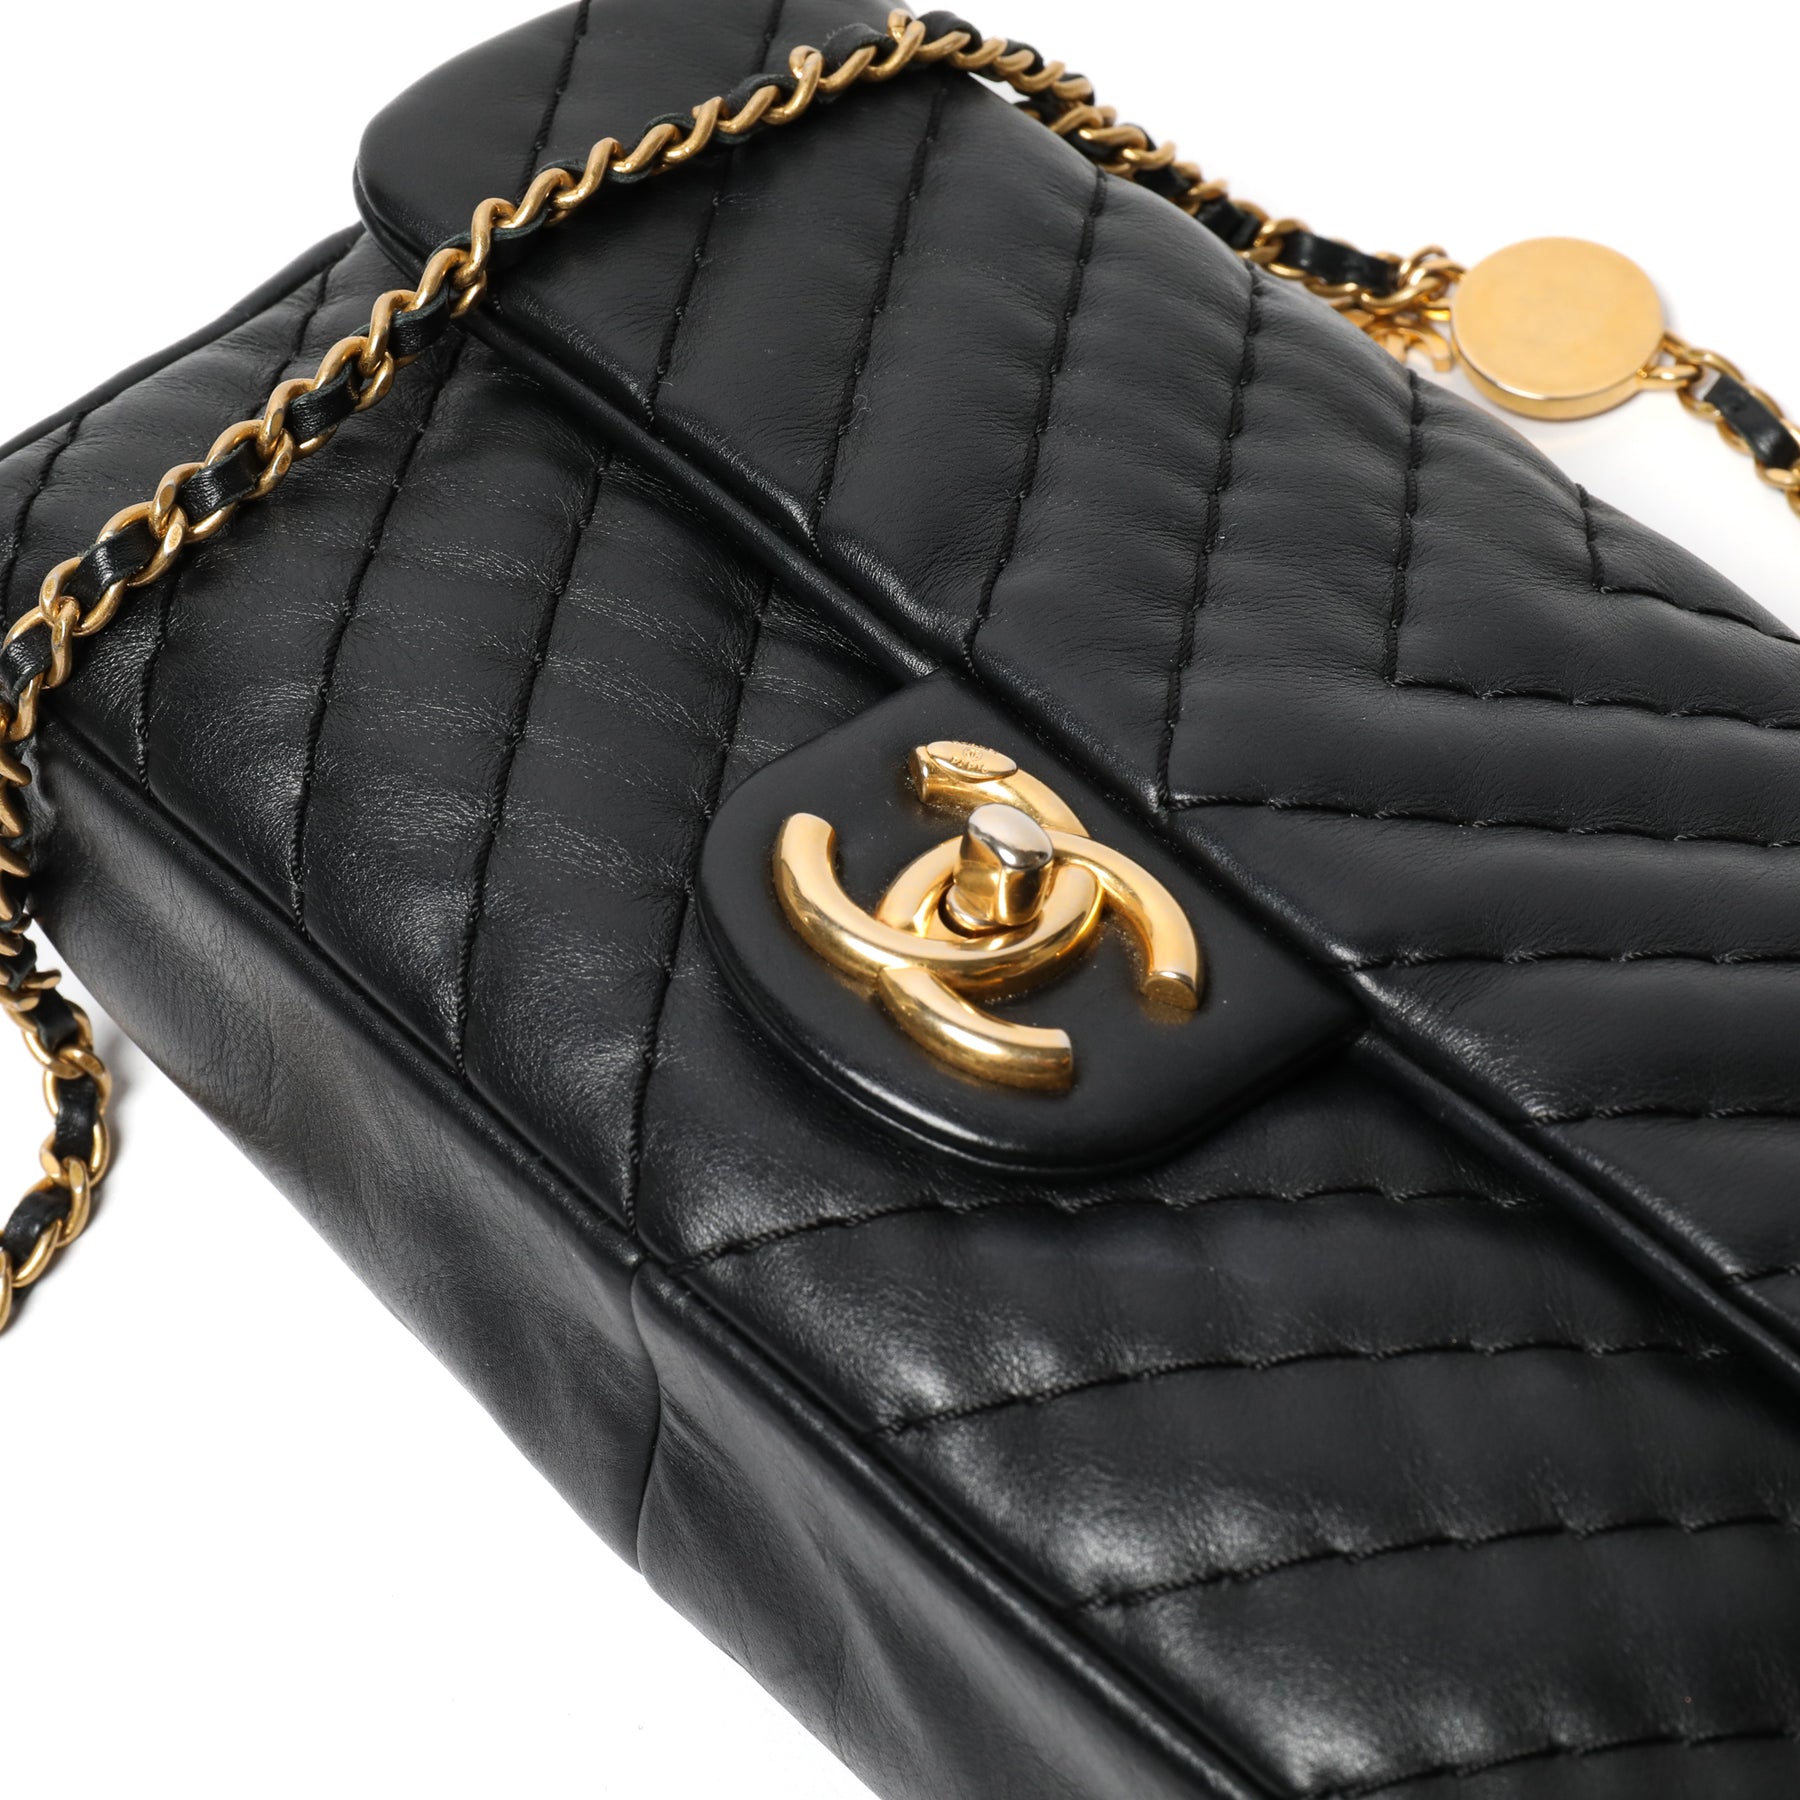 CHANEL Black V Stitch Double Flap Crossbody bag with Gold Chain